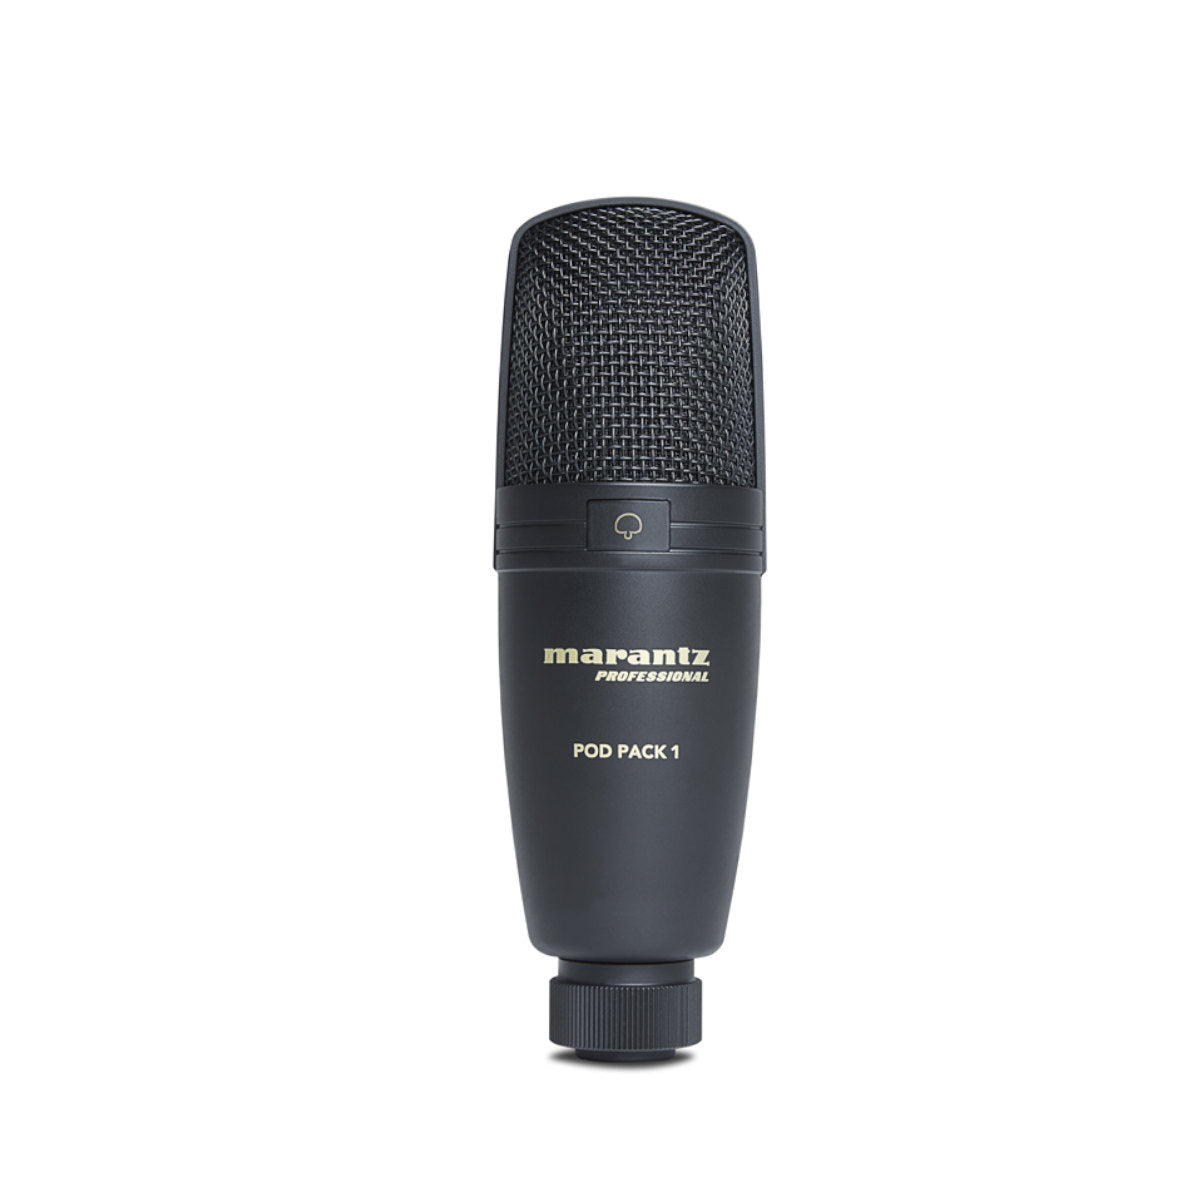 Marantz Professional Pod Pack 1 - USB Microphone with Broadcast Stand and Cable - Ooberpad India